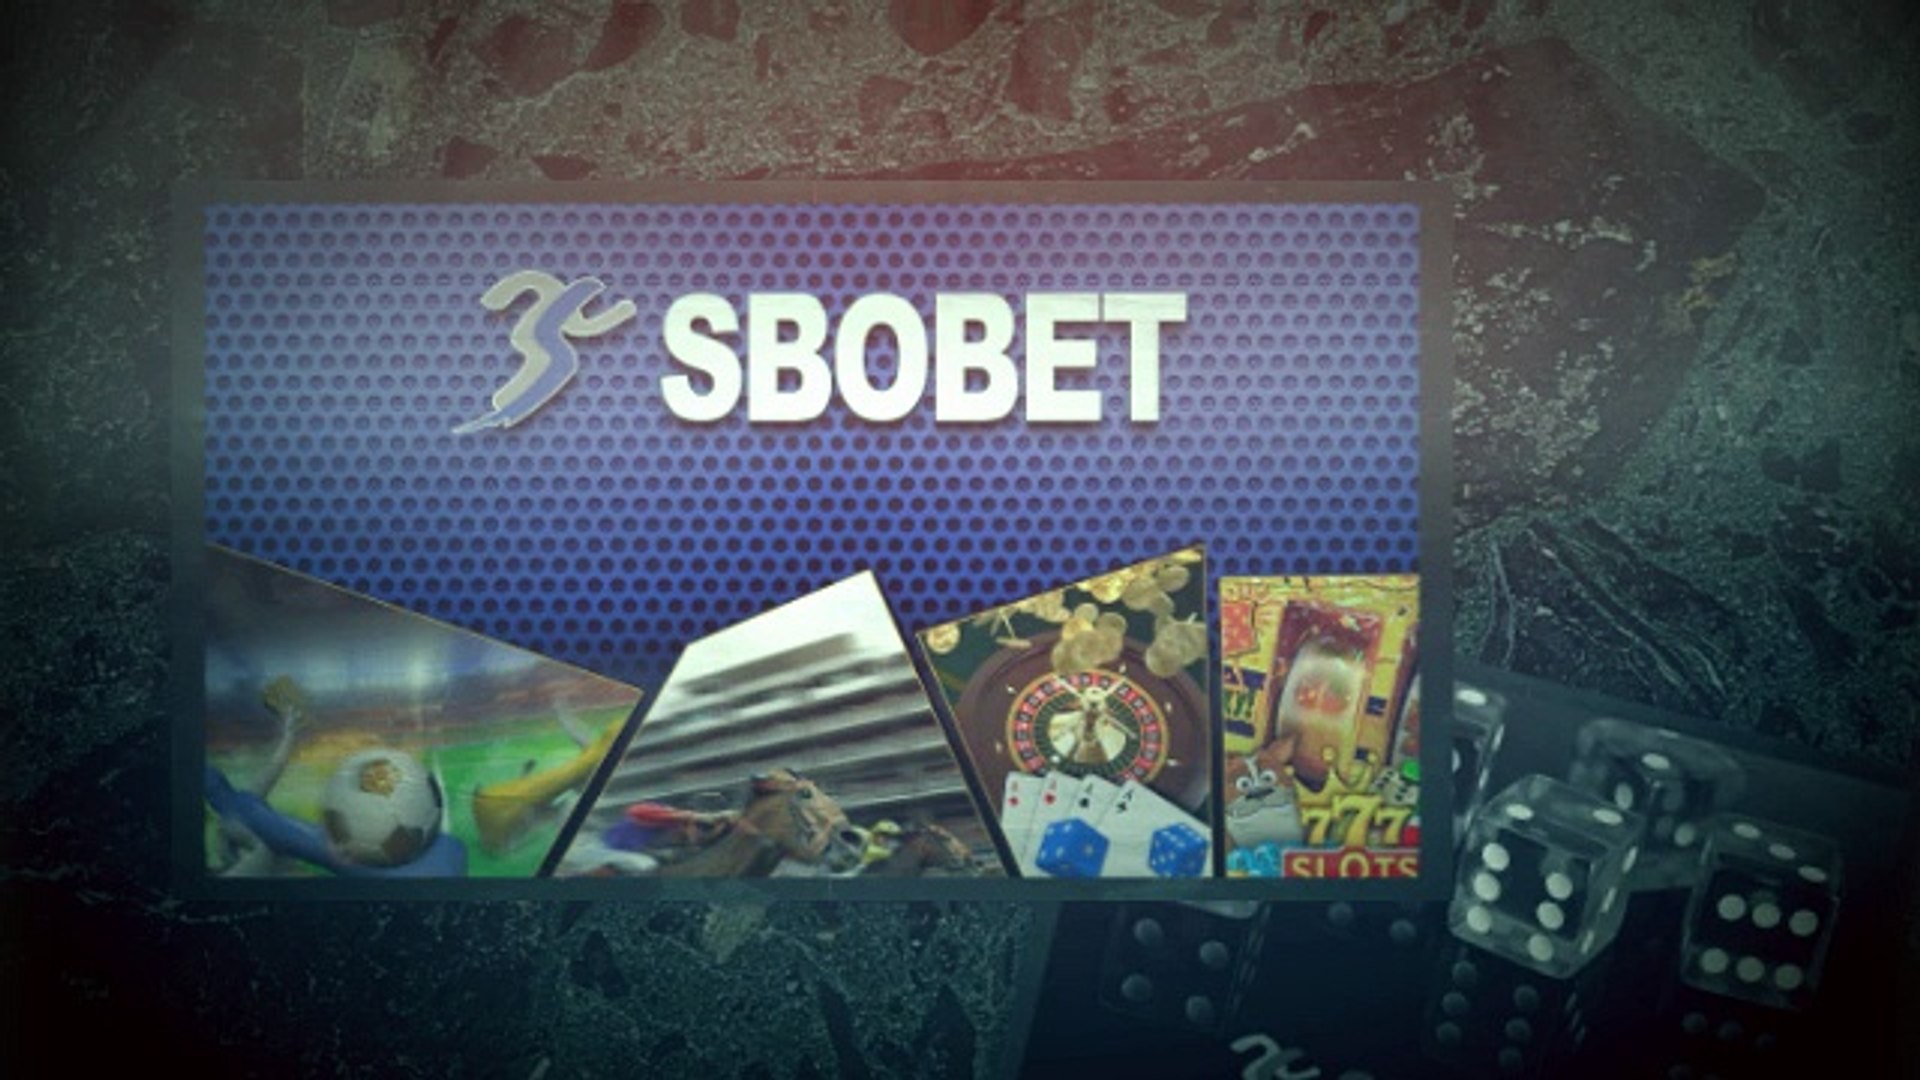 Sbobet is the perfect choice for your bets as it provides you with whole safety and self-confidence